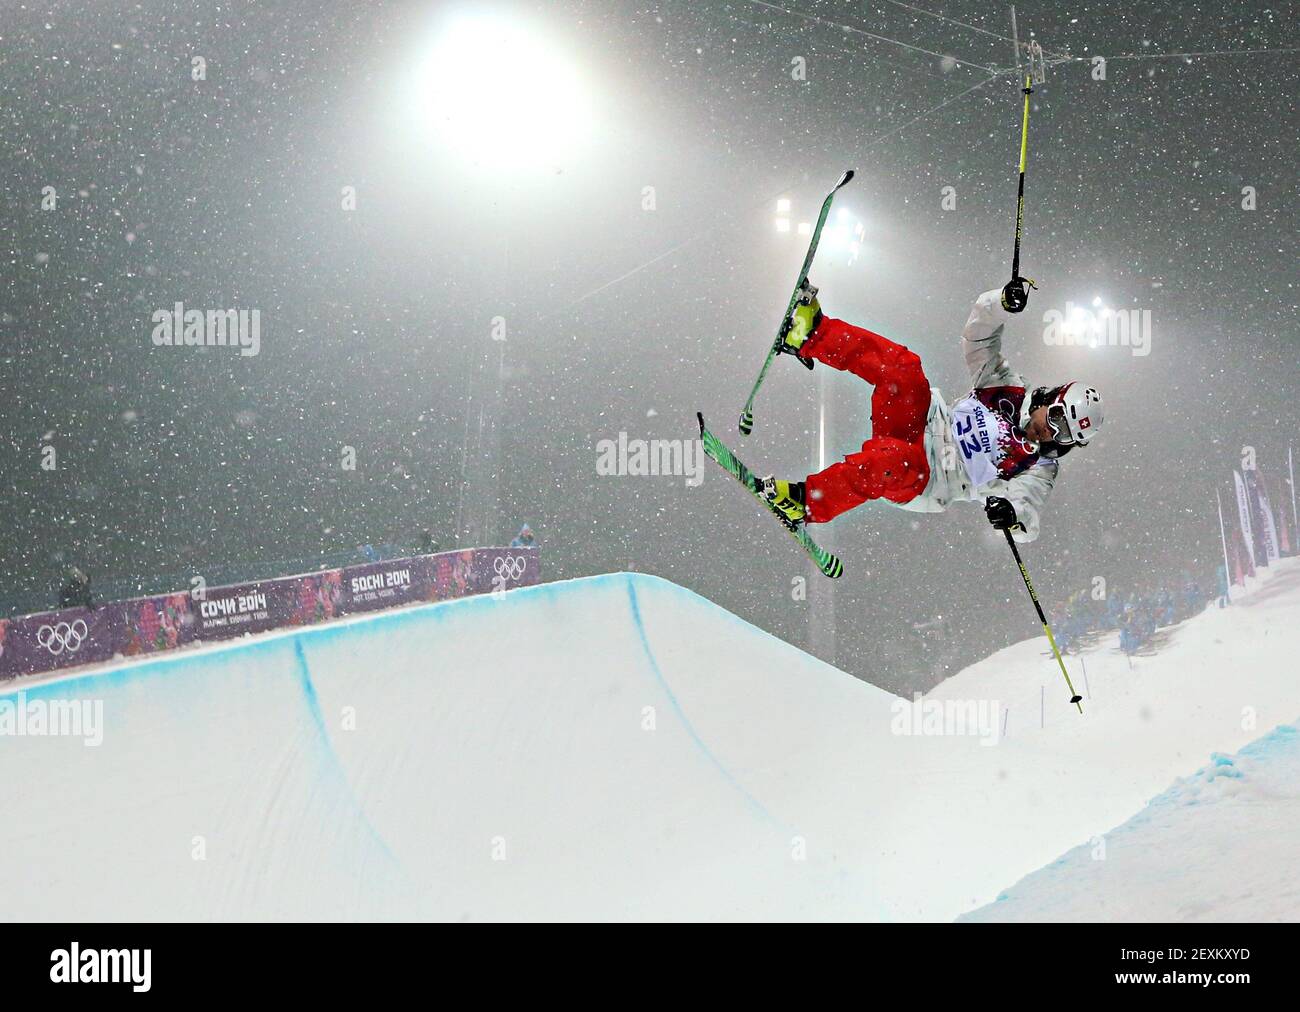 Nils Lauper of Switzerland competes in qualifying for the men's ski halfpipe at Rosa Khutor Extreme Park during the Winter Olympics in Sochi, Russia, Tuesday, Feb. 18, 2014. (Photo by Brian Cassella/Chicago Tribune/MCT/Sipa USA) Stock Photo